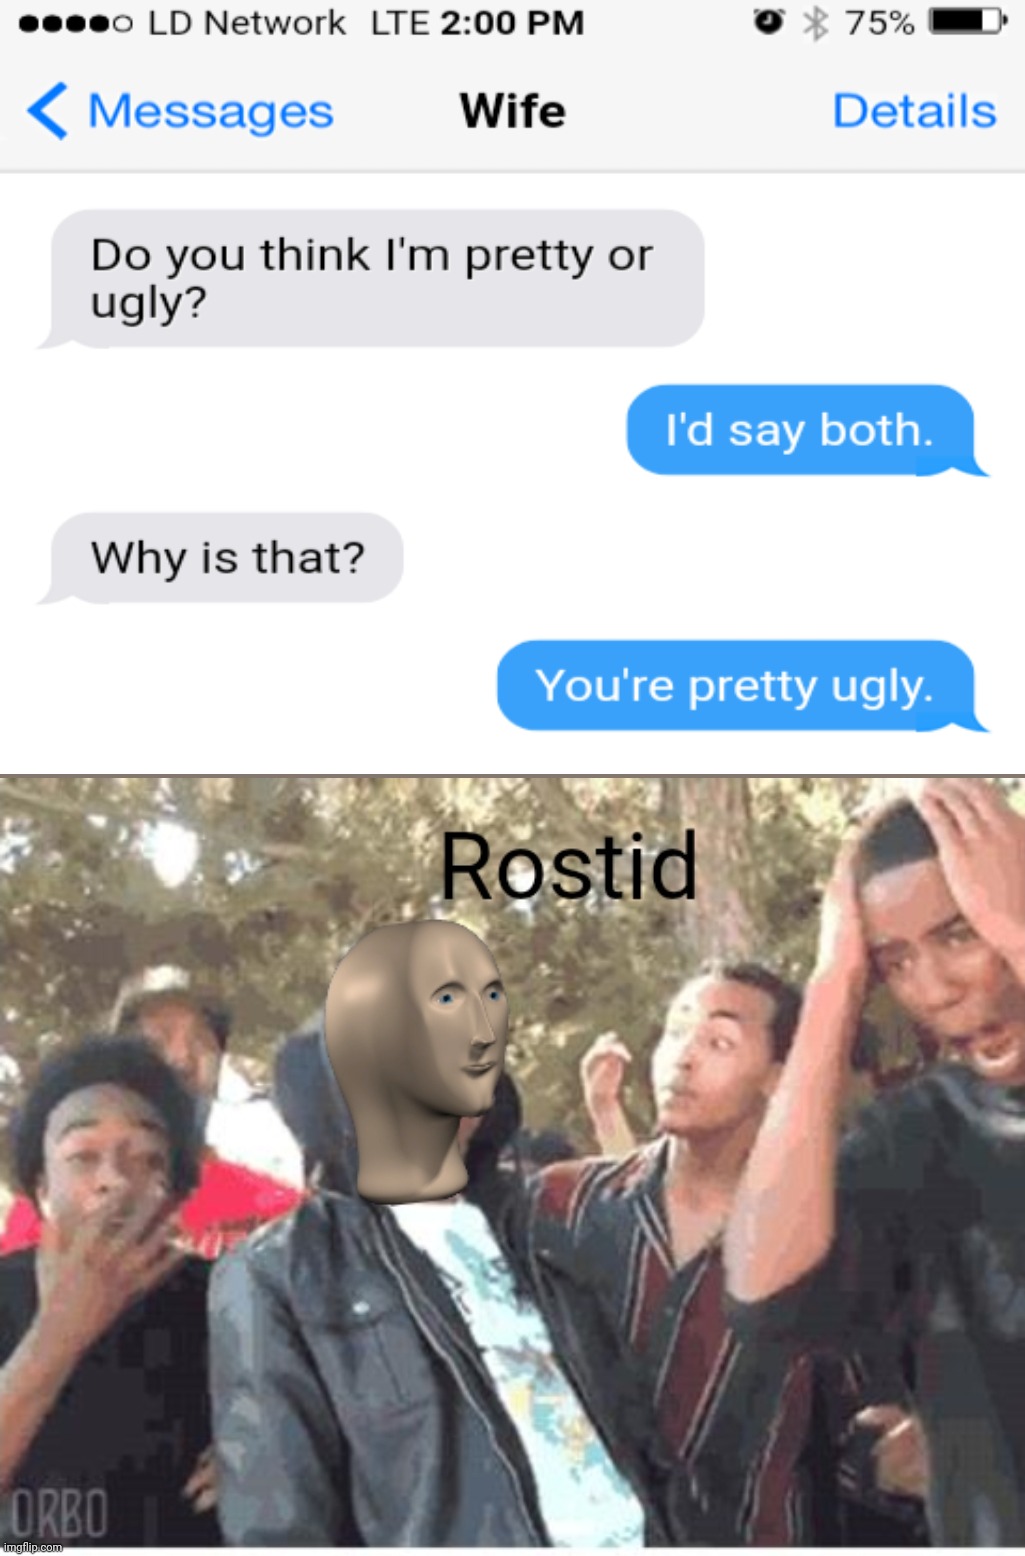 You're pretty ugly. | image tagged in meme man rostid,funny,memes,get rekt,text messages | made w/ Imgflip meme maker